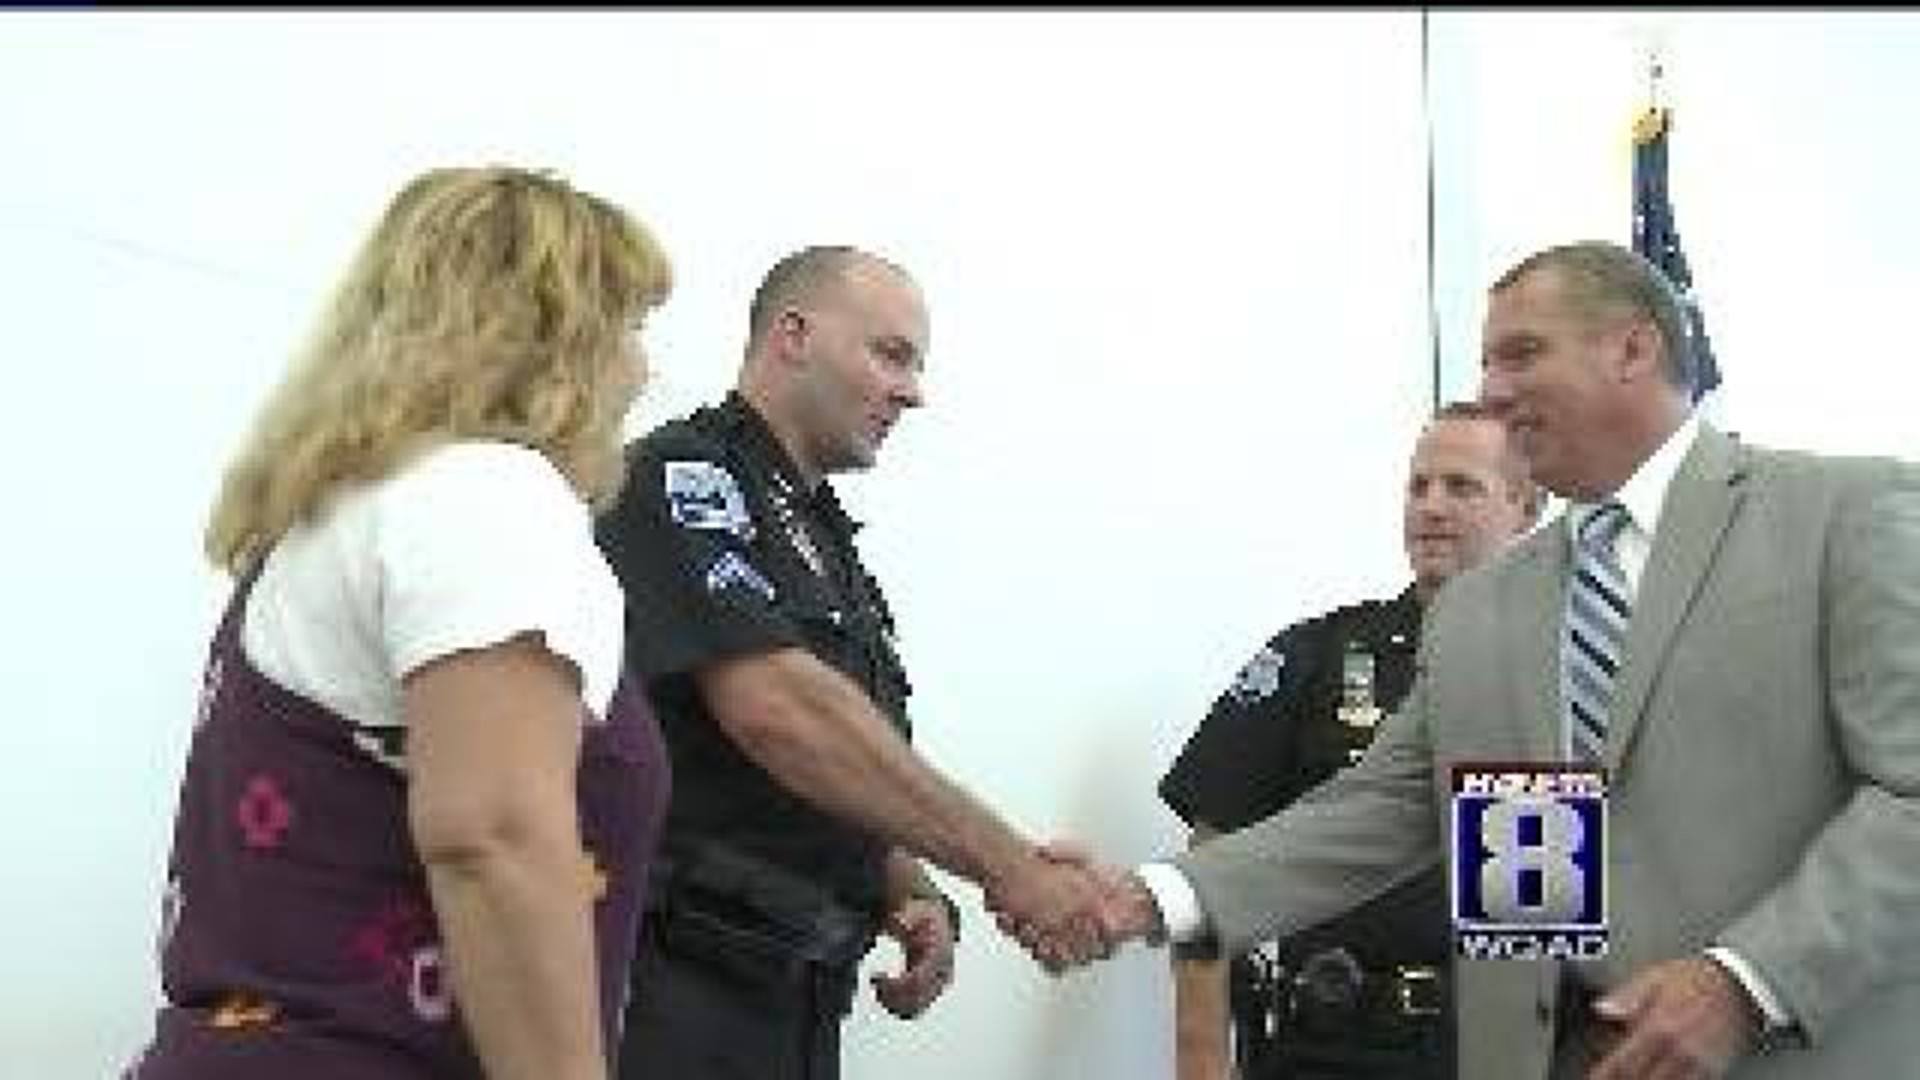 Davenport promotes police officers